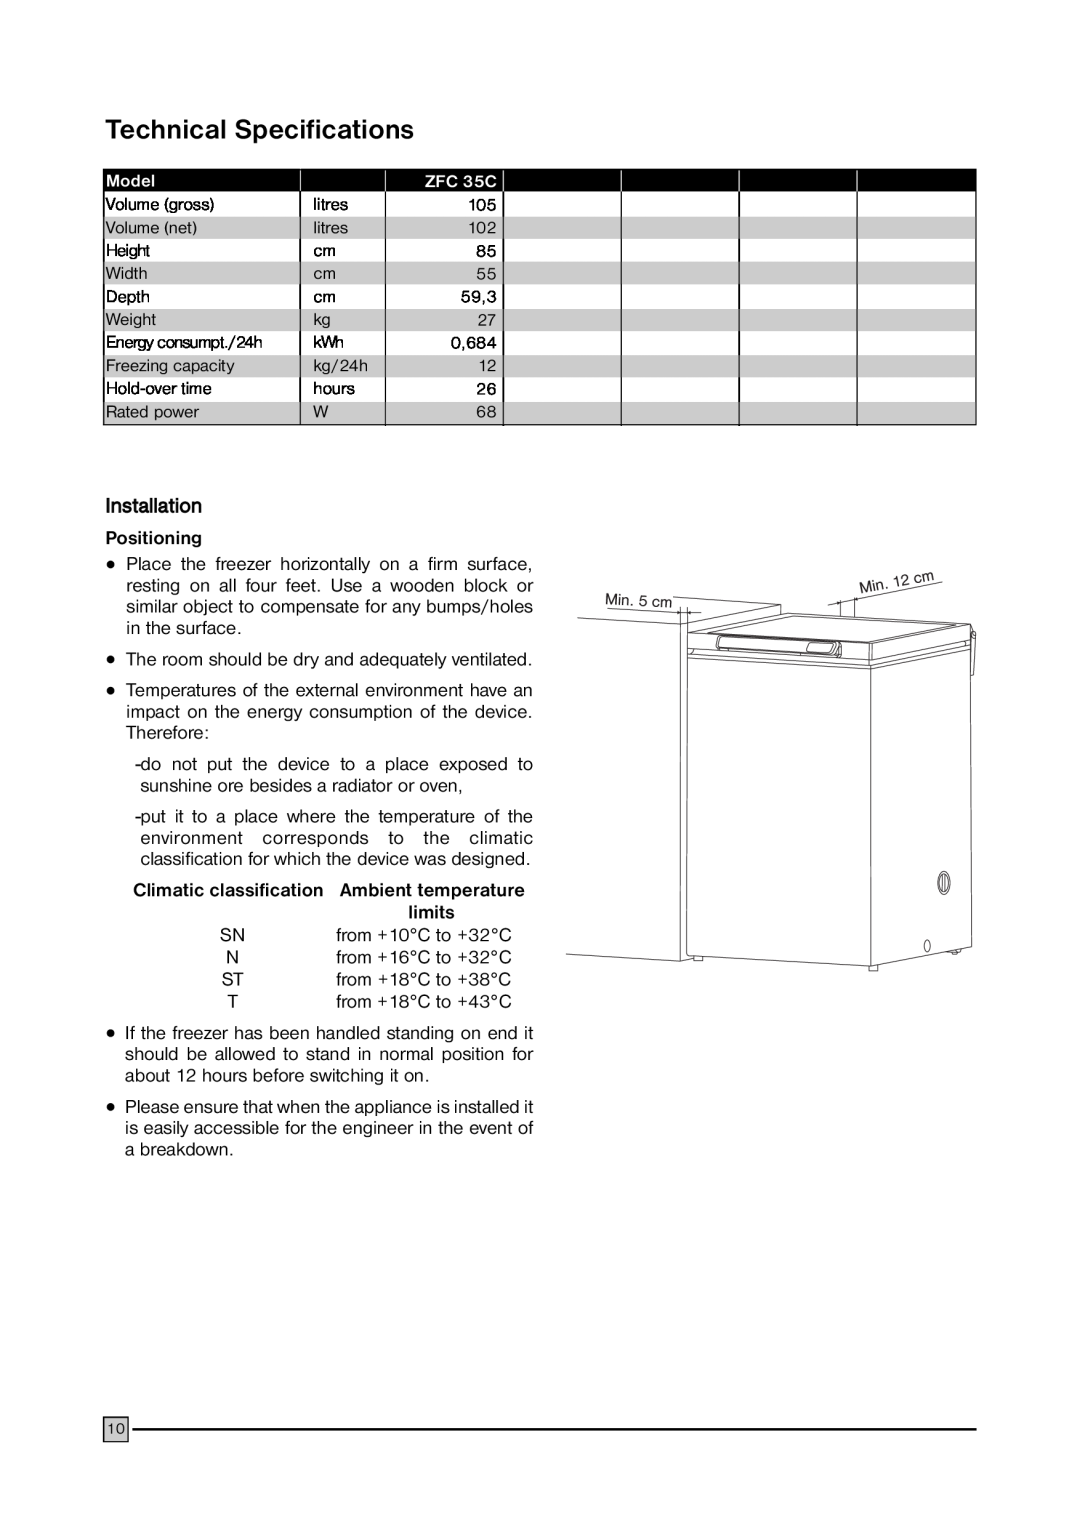 Zanussi ZFC 35C installation manual Technical Specifications, Installation, Positioning, limits 